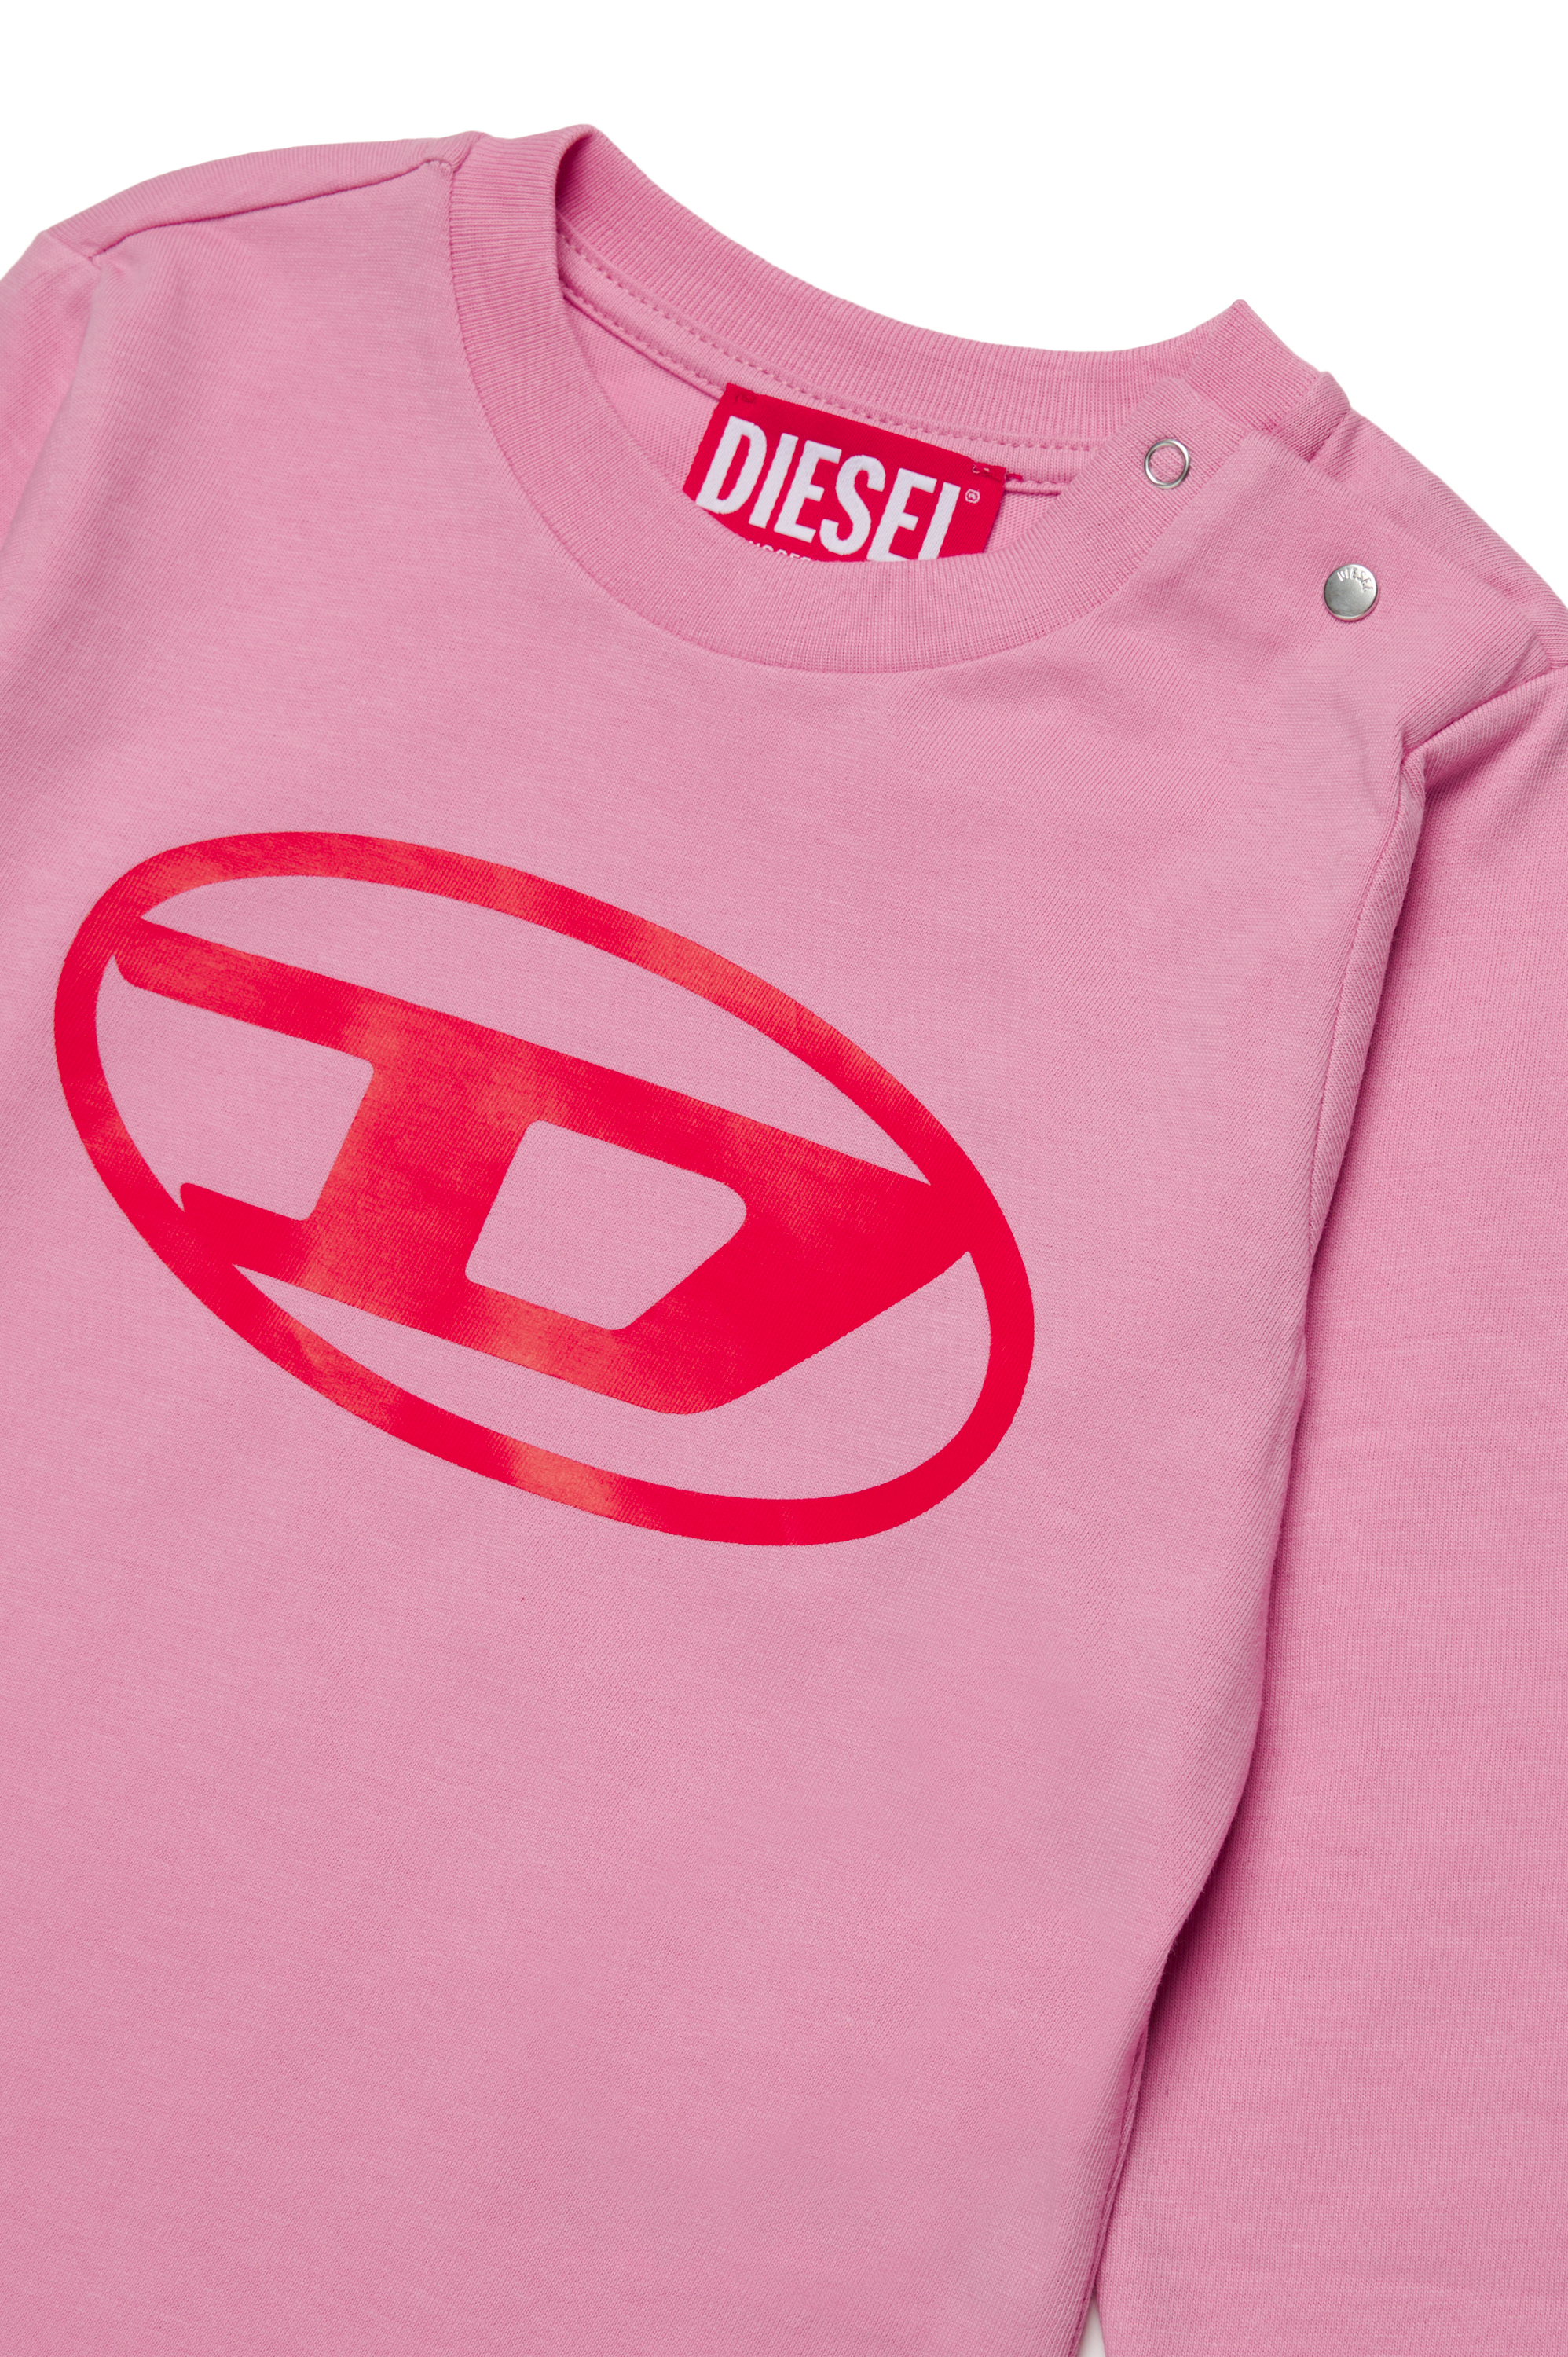 Diesel - TCERBLSB, Unisex Langarm-T-Shirt mit Oval D in Rosa - Image 3